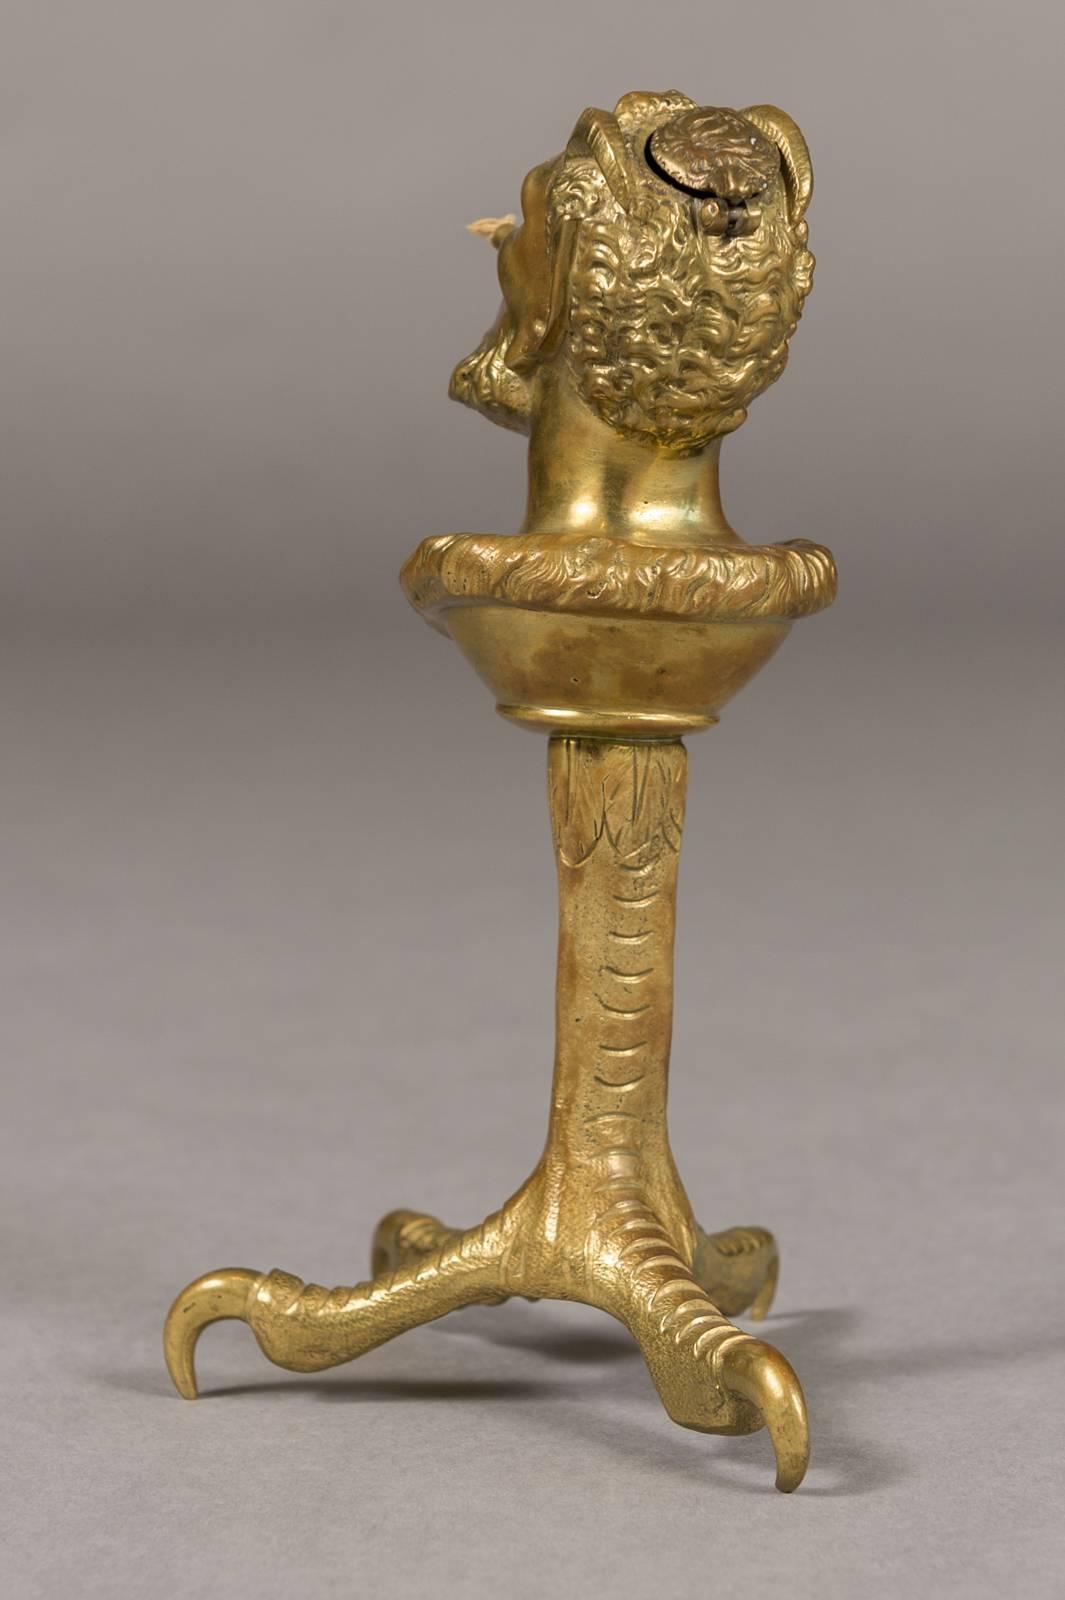 A French doré bronze cigar lighter depicting satyr mounted atop a chicken leg.

Very finely made with Satyr's head standing on a large chicken leg.

The wick extends from his mouth and fuel enters into the back of his head.

Measures: Height